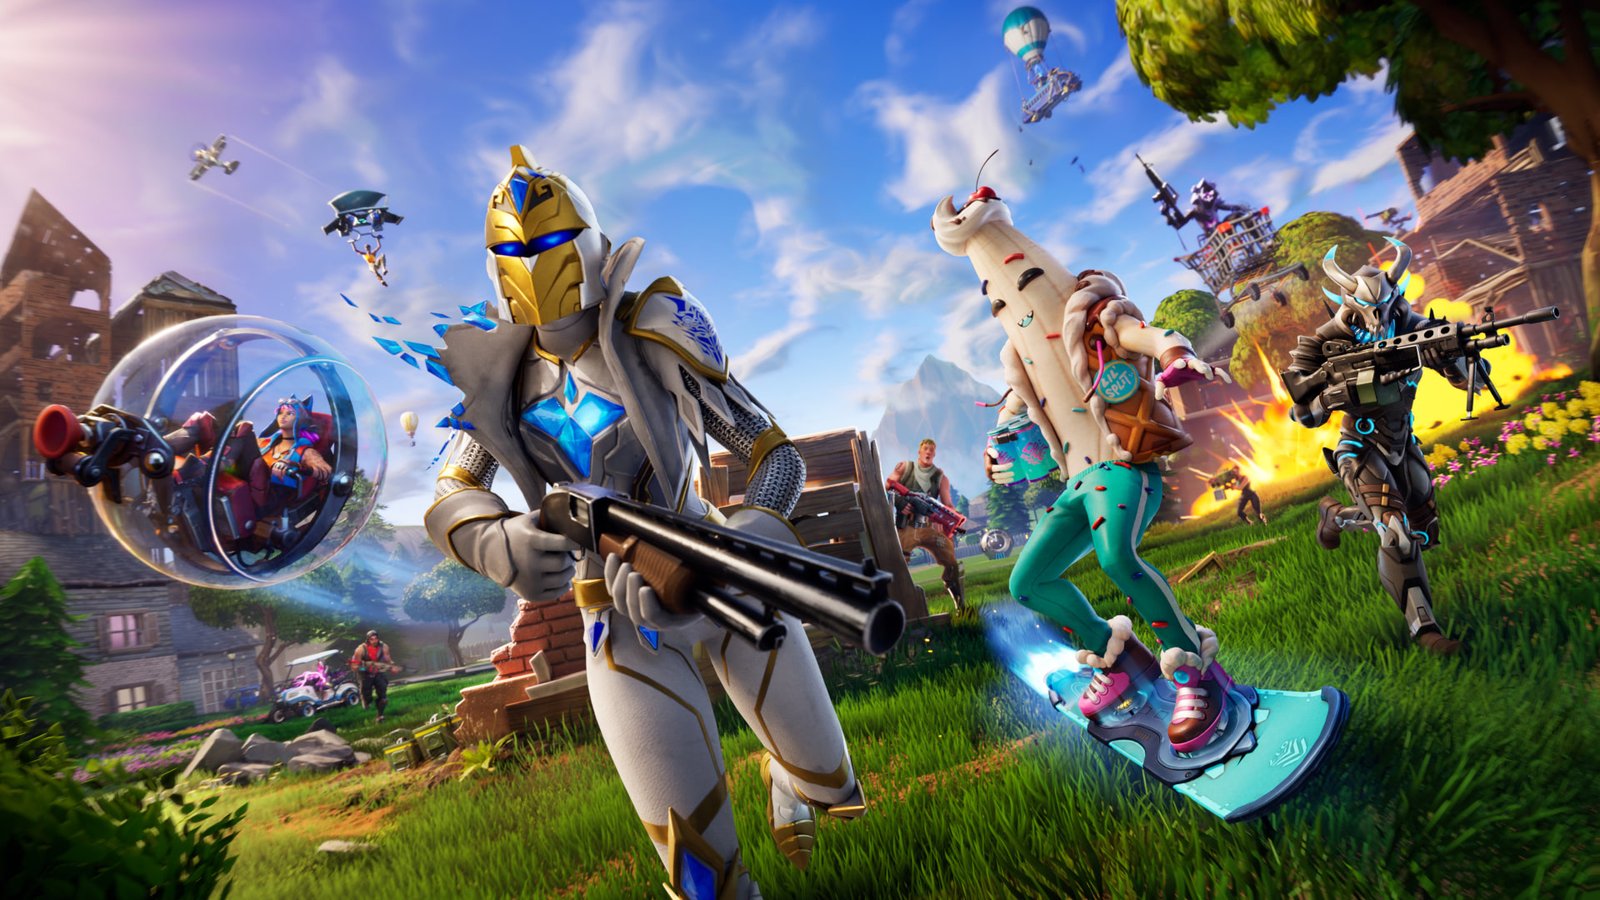 The British Army shuts down Fortnite project following intense criticism